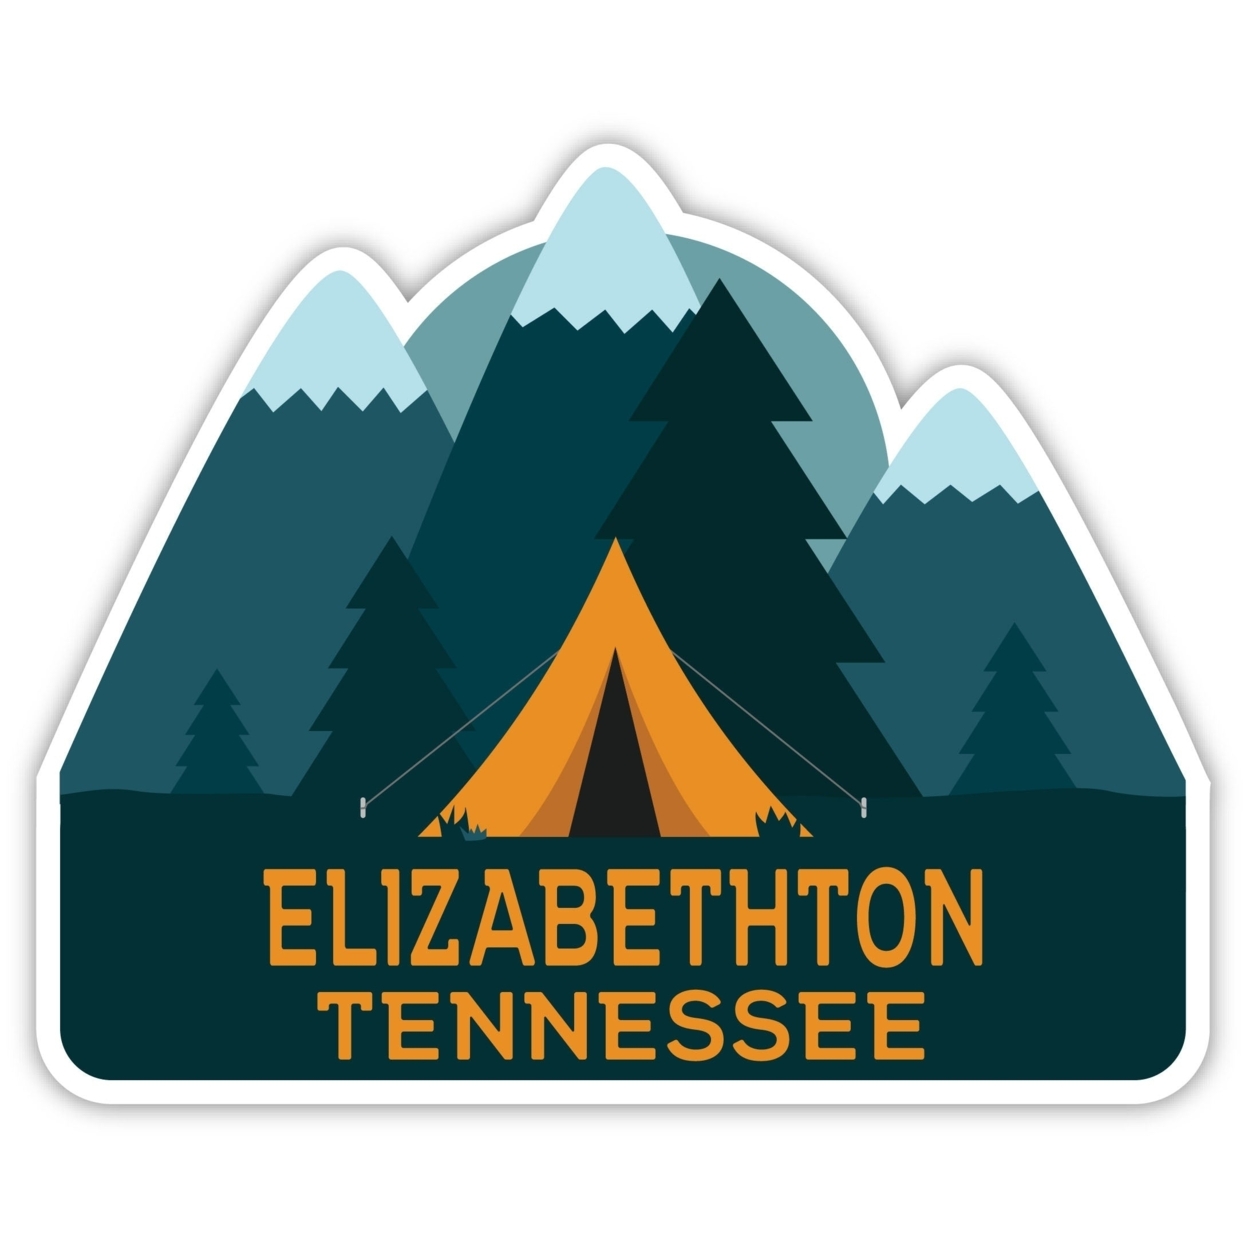 Elizabethton Tennessee Souvenir Decorative Stickers (Choose Theme And Size) - 4-Pack, 2-Inch, Tent